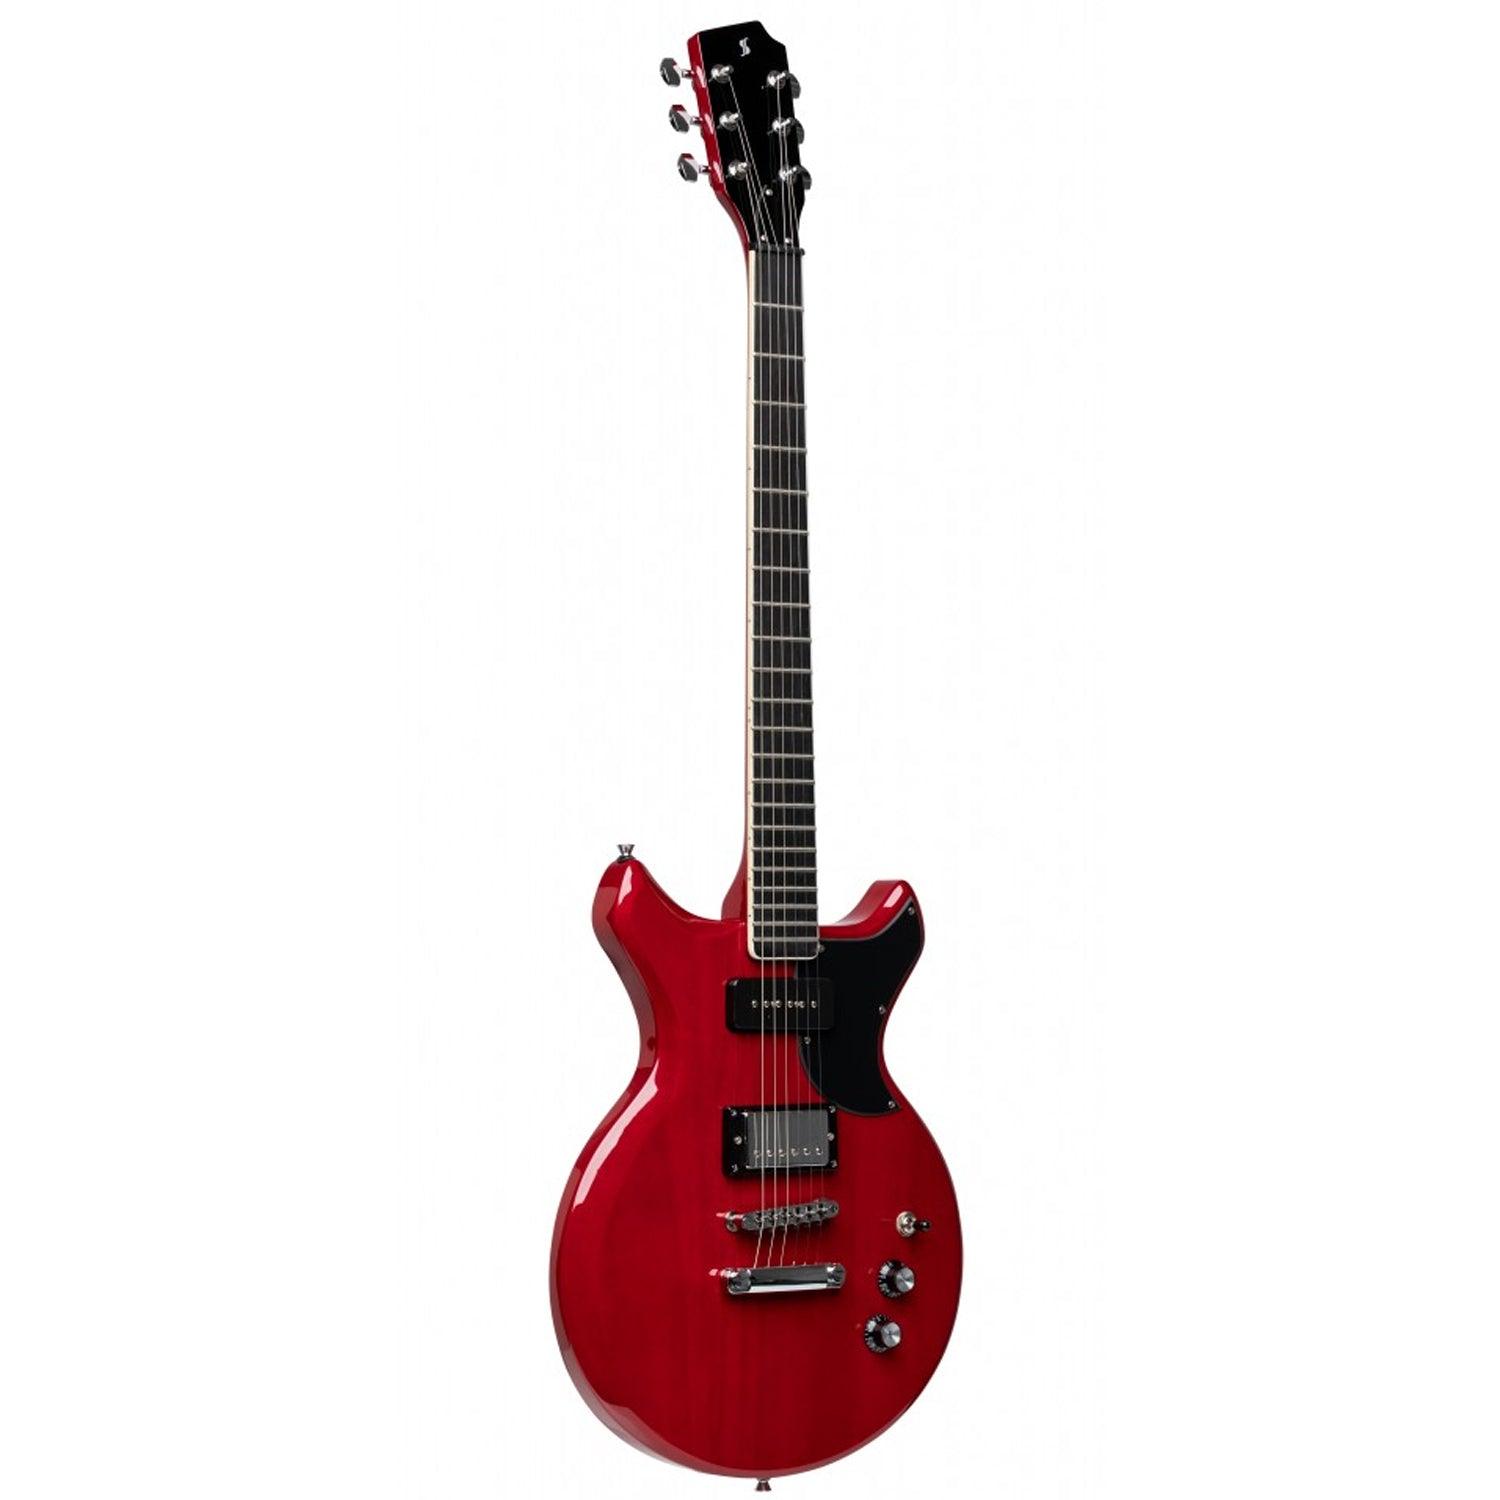 Stagg SVY DC TCH Silveray series DC model Electric Guitar with solid mahogany body and double cutaway - DY Pro Audio